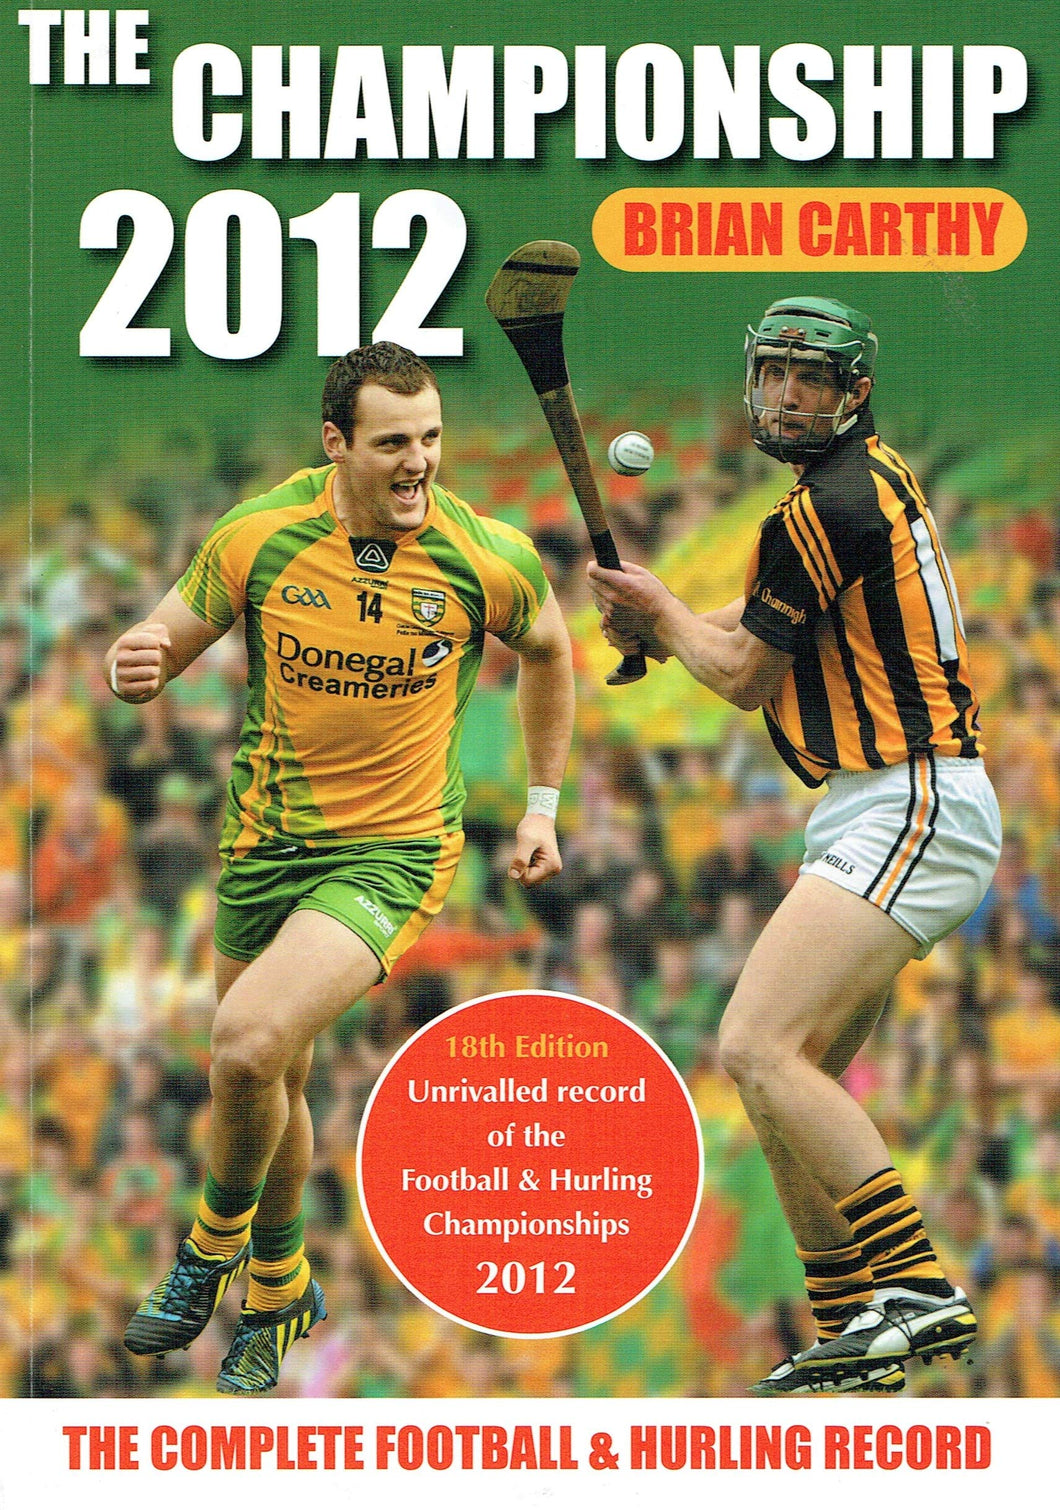 The Championship 2012 - The Complete Football and Hurling Record, 18th Edition: Unrivalled Record of the Football and Hurling Championships 2012